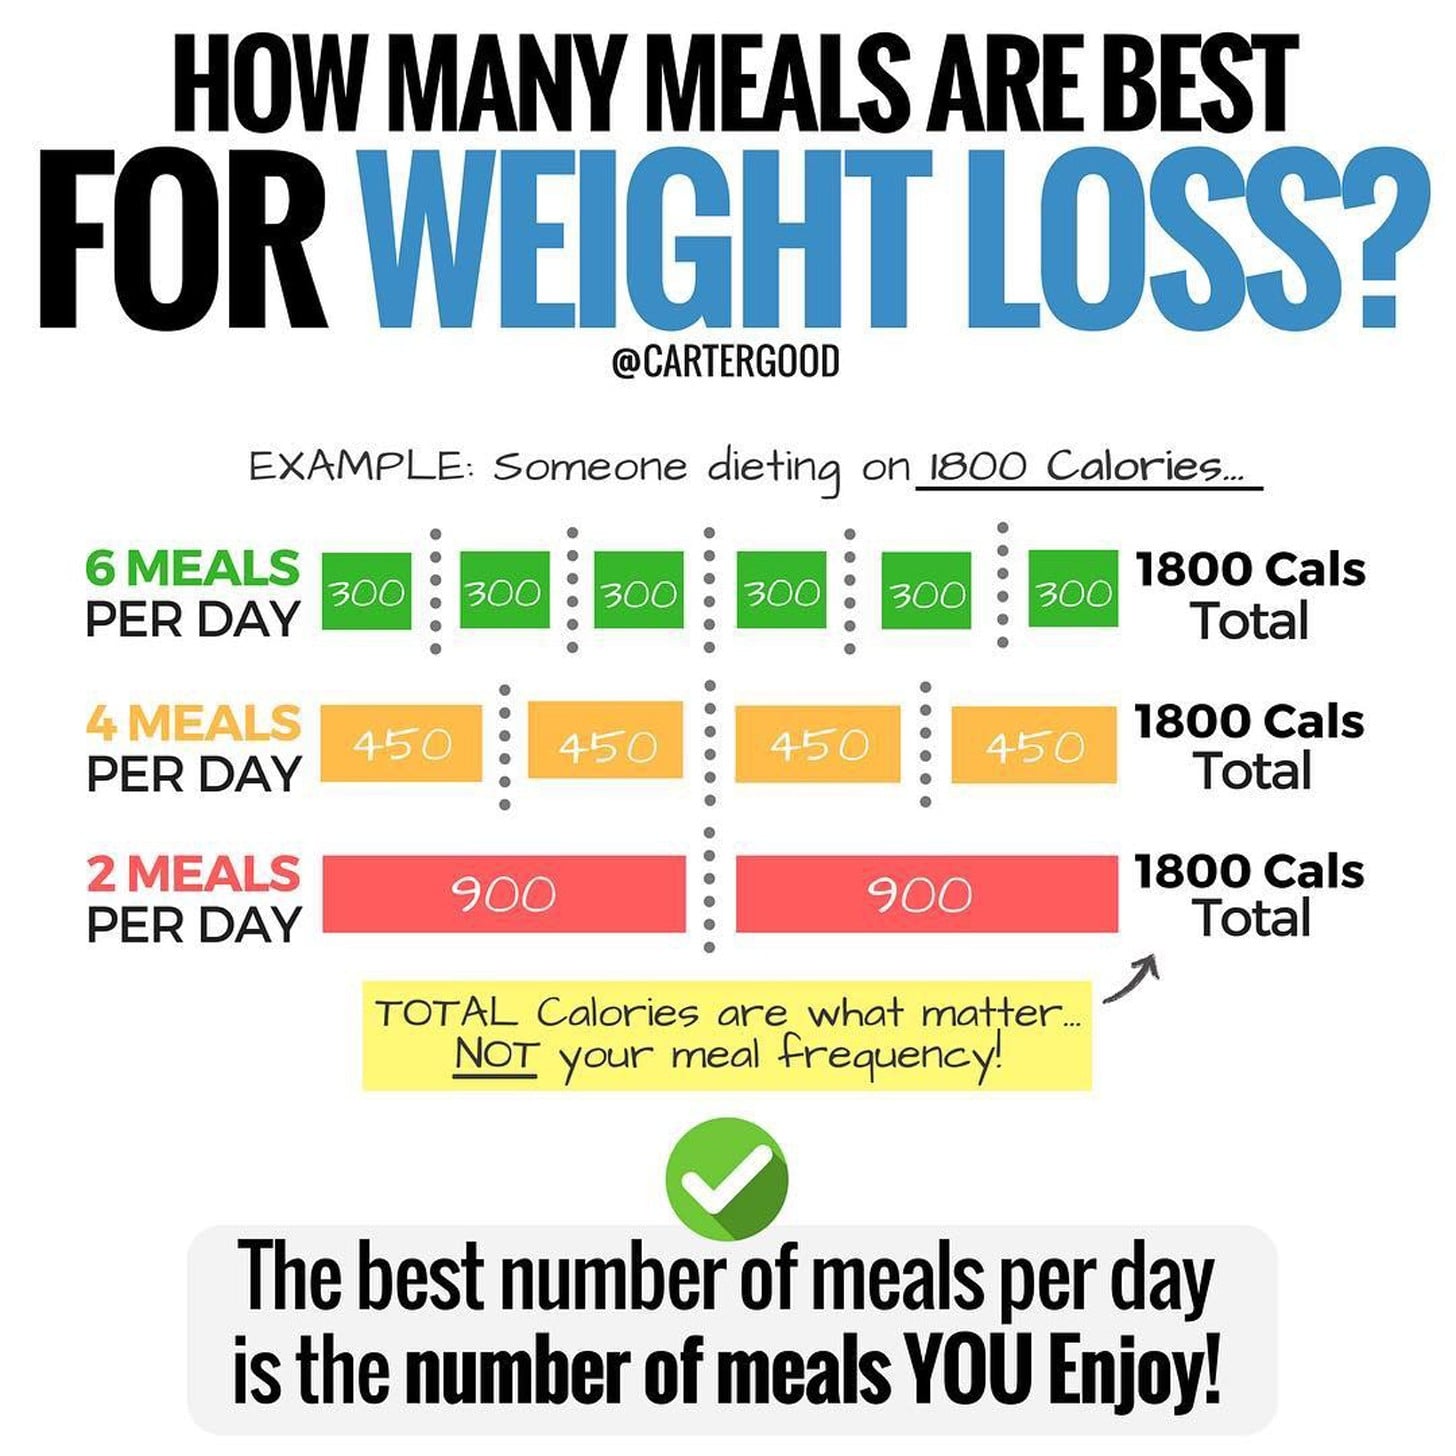 Set meal frequency